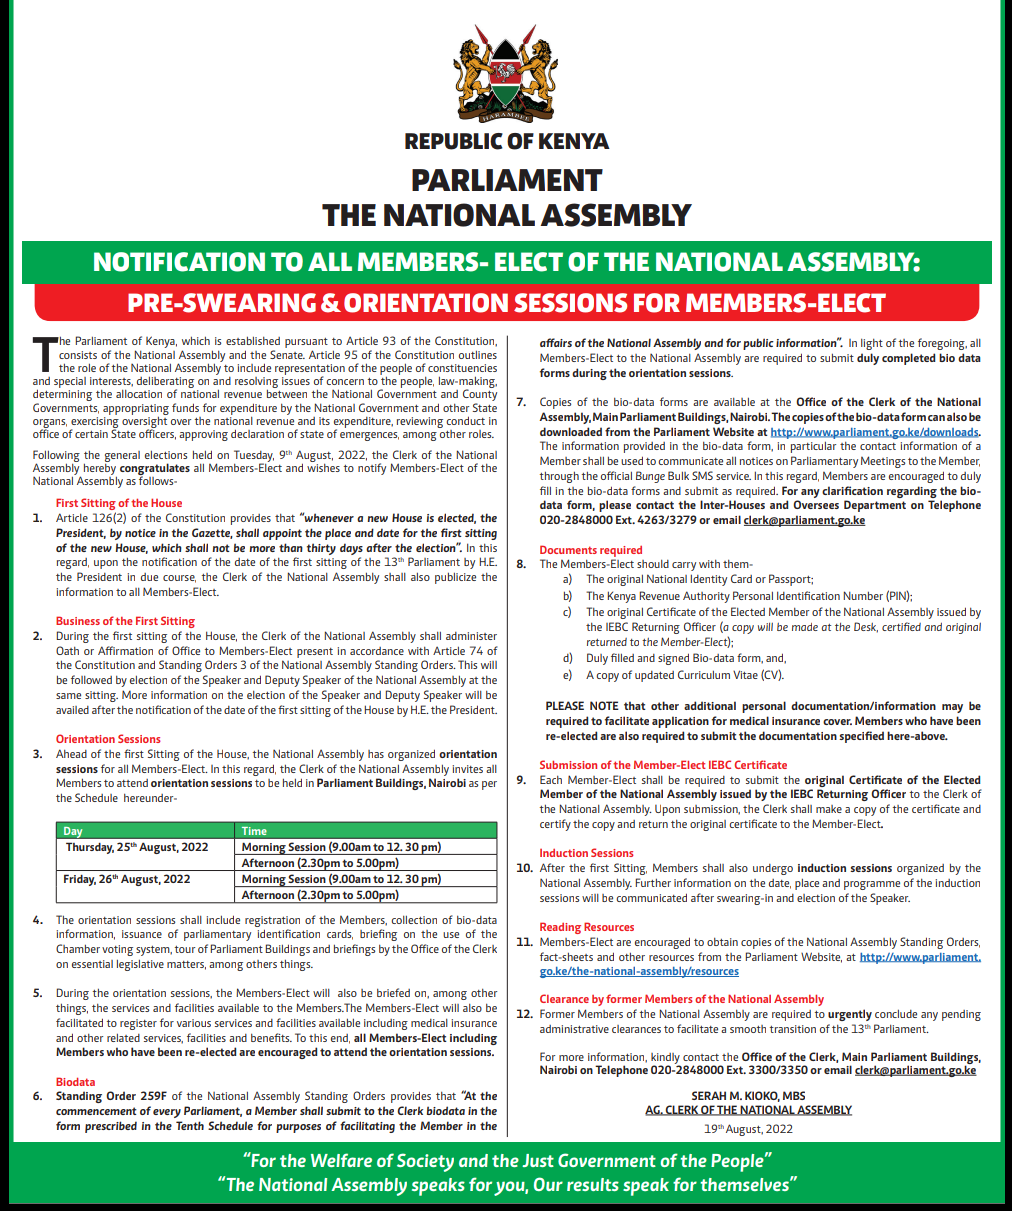 NOTIFICATION TO ALL MEMBERS- ELECT OF THE NATIONAL ASSEMBLY